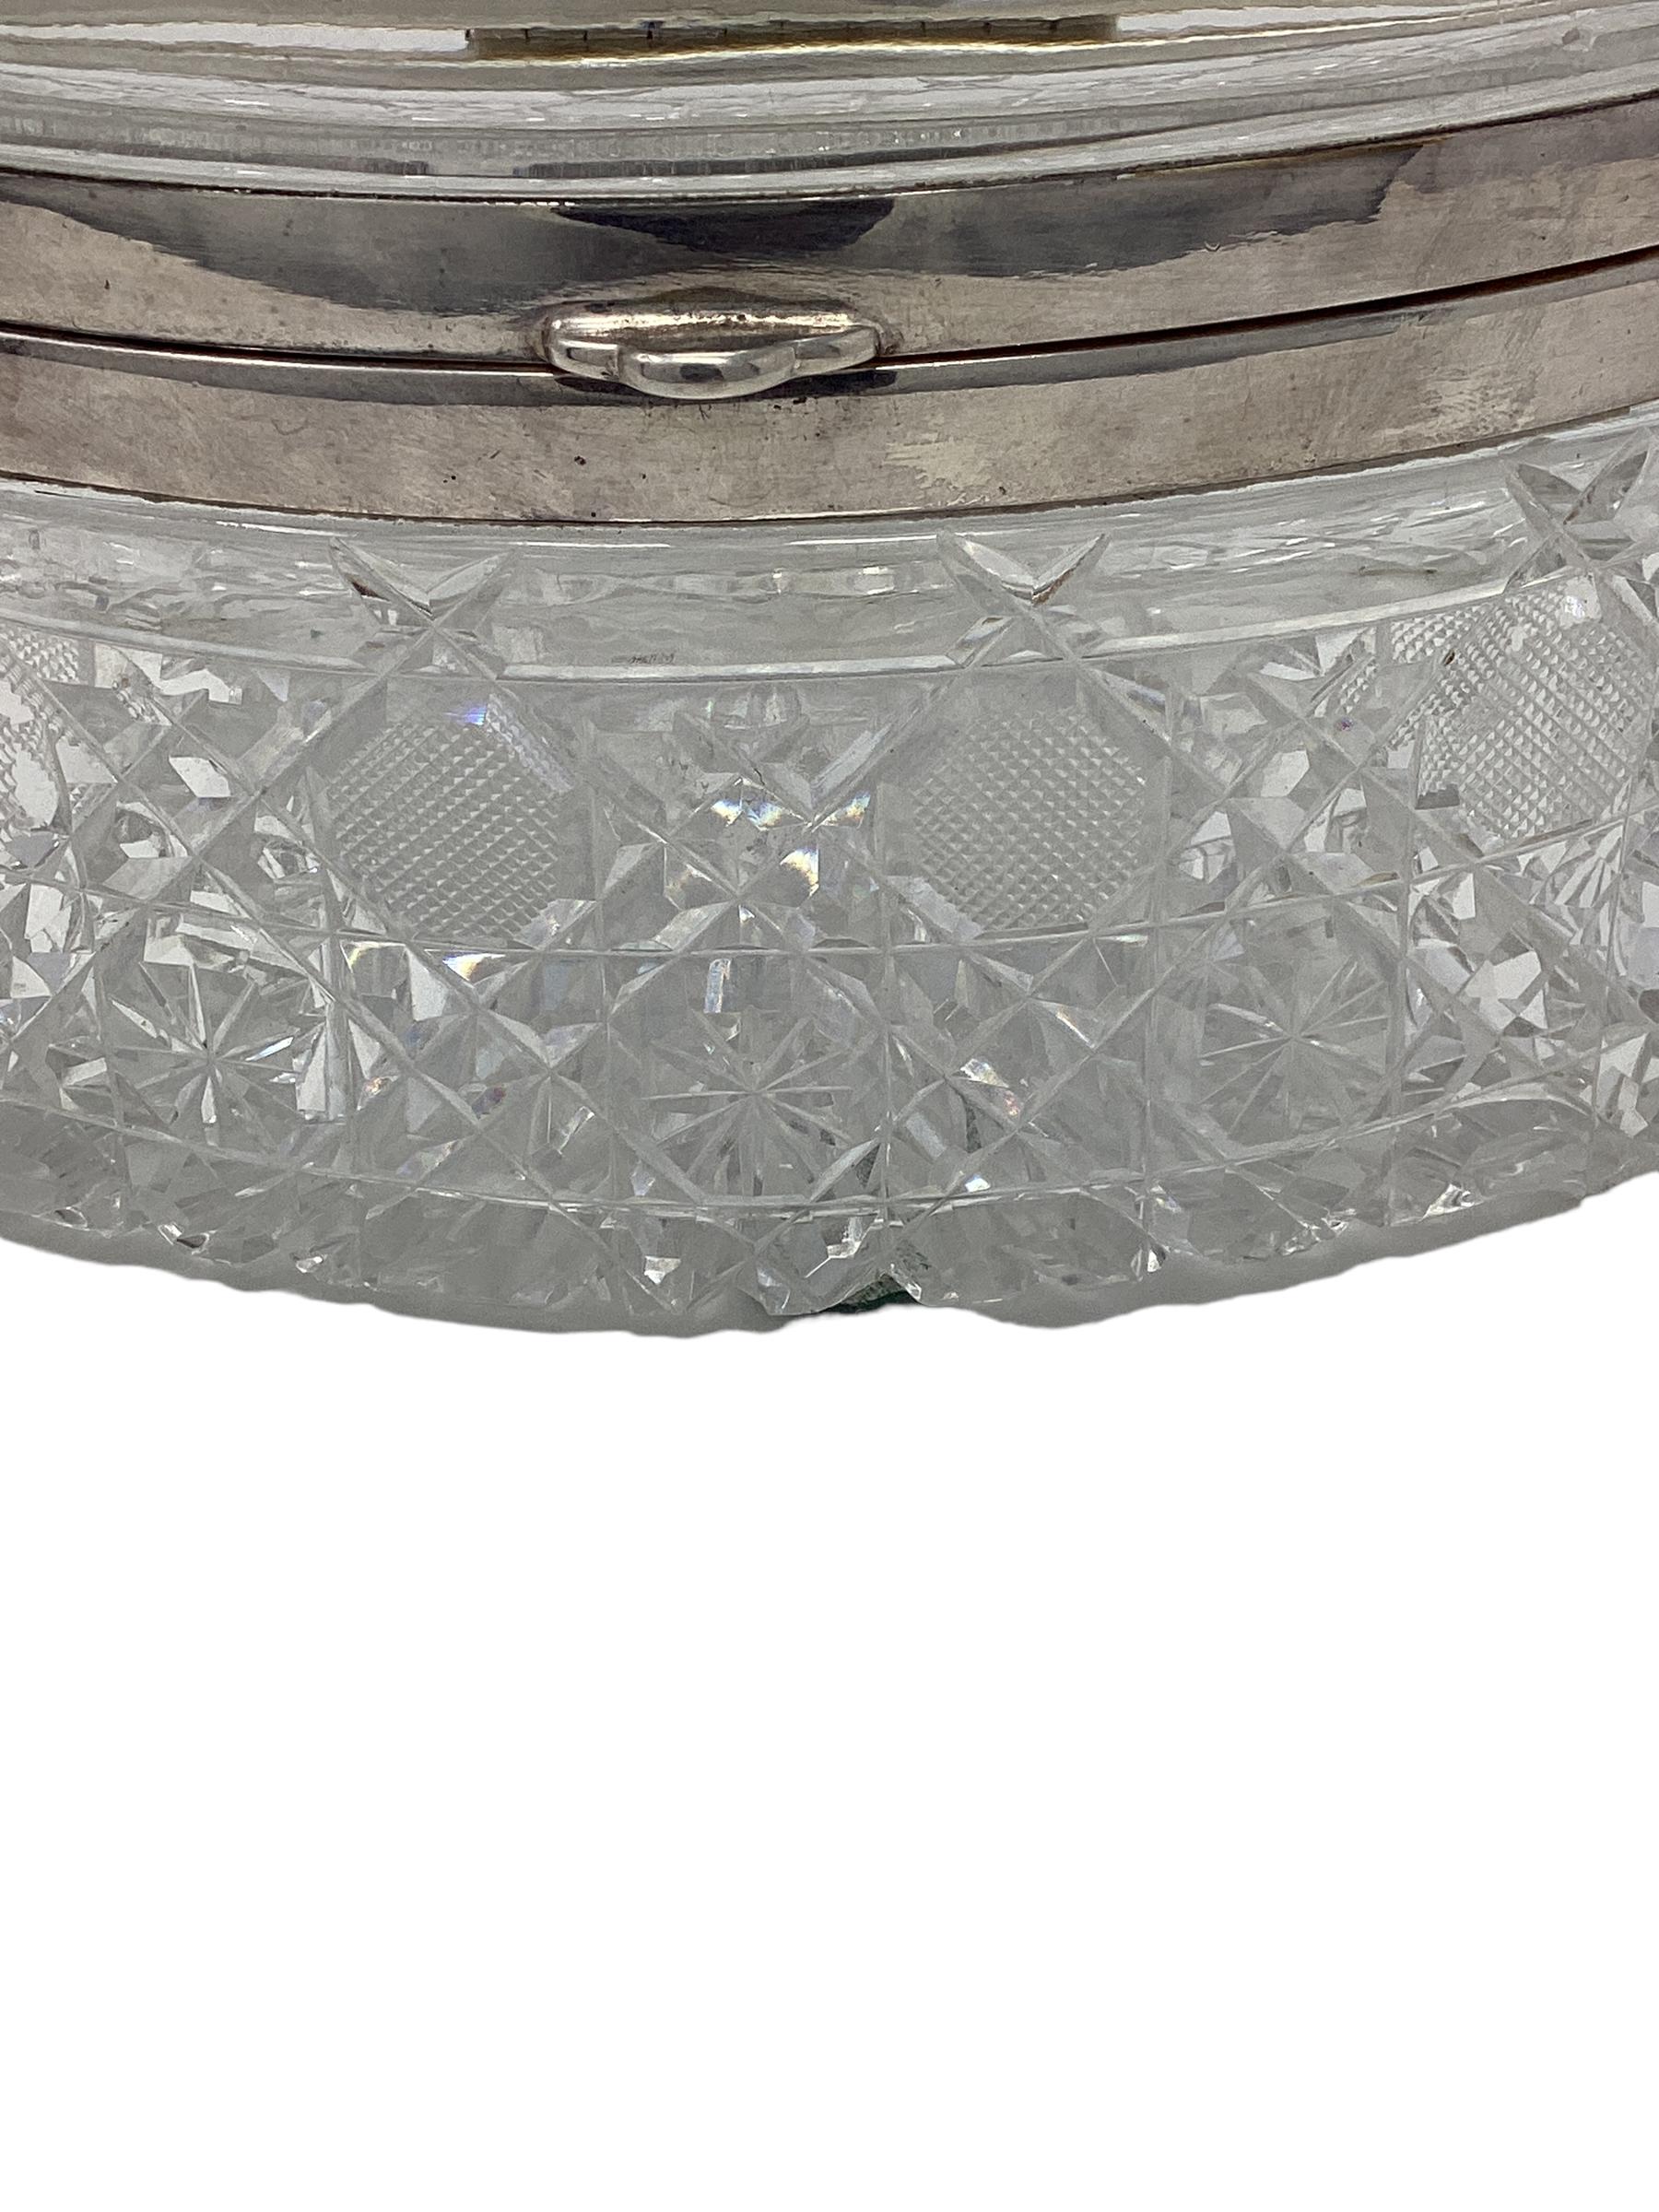 Large Oval Cut Crystal Box with Silver Mount In Good Condition For Sale In Chapel Hill, NC